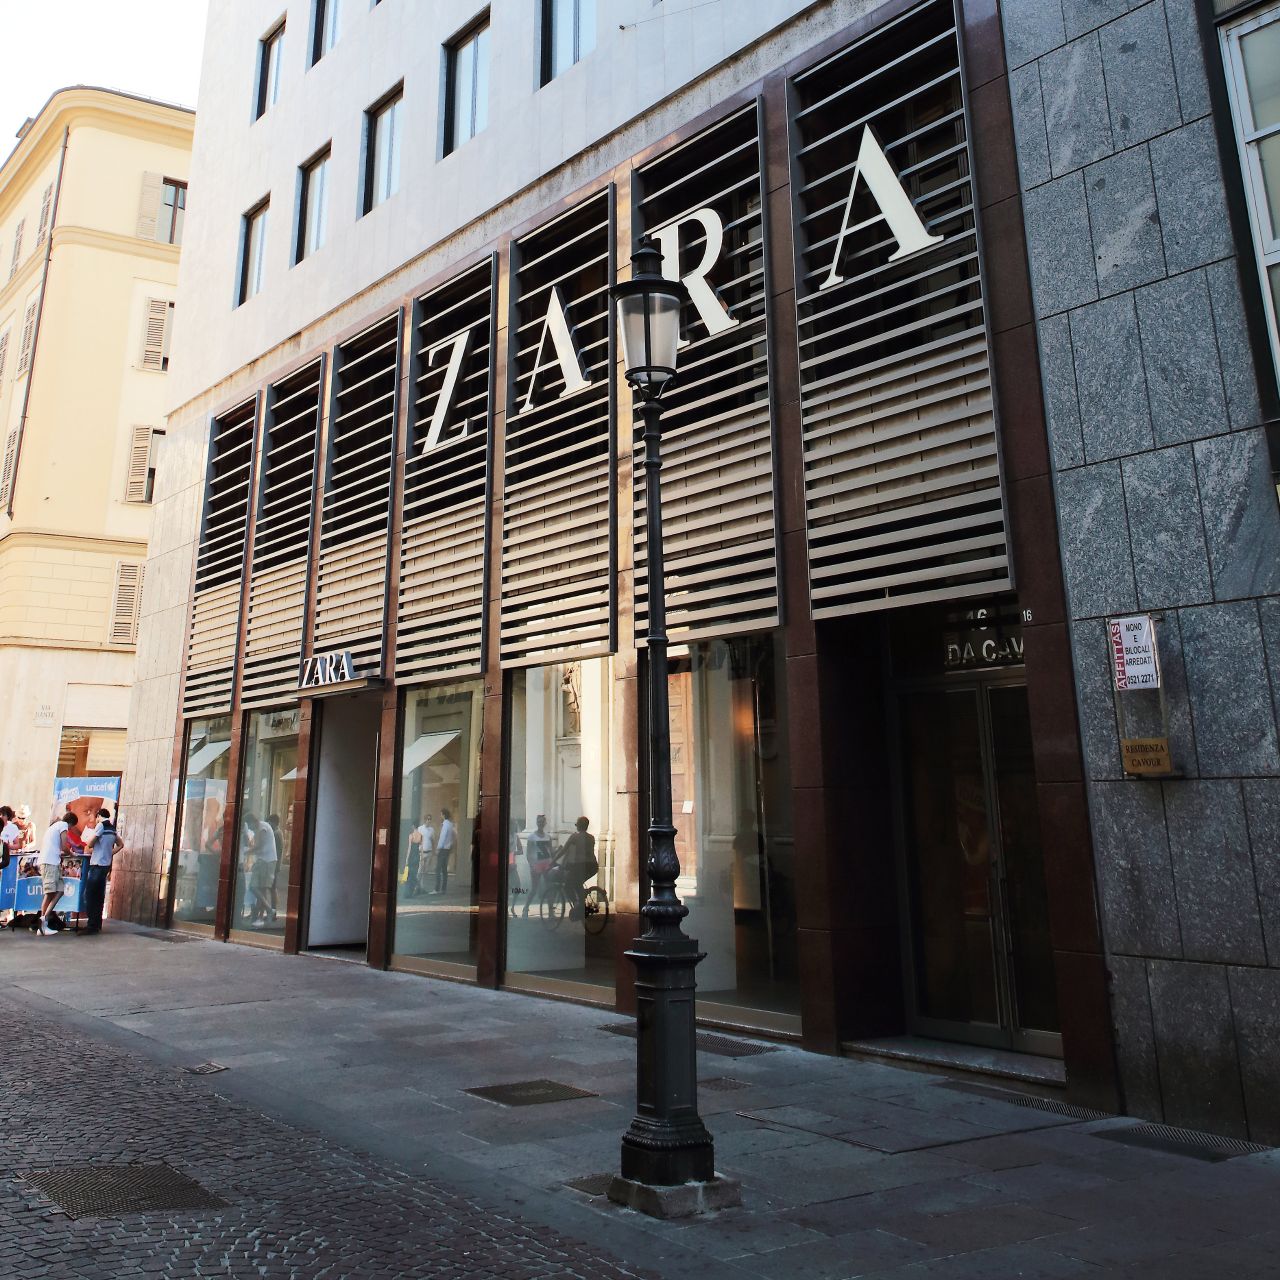 Hotel Residence Cavour - Parma - Great prices at HOTEL INFO